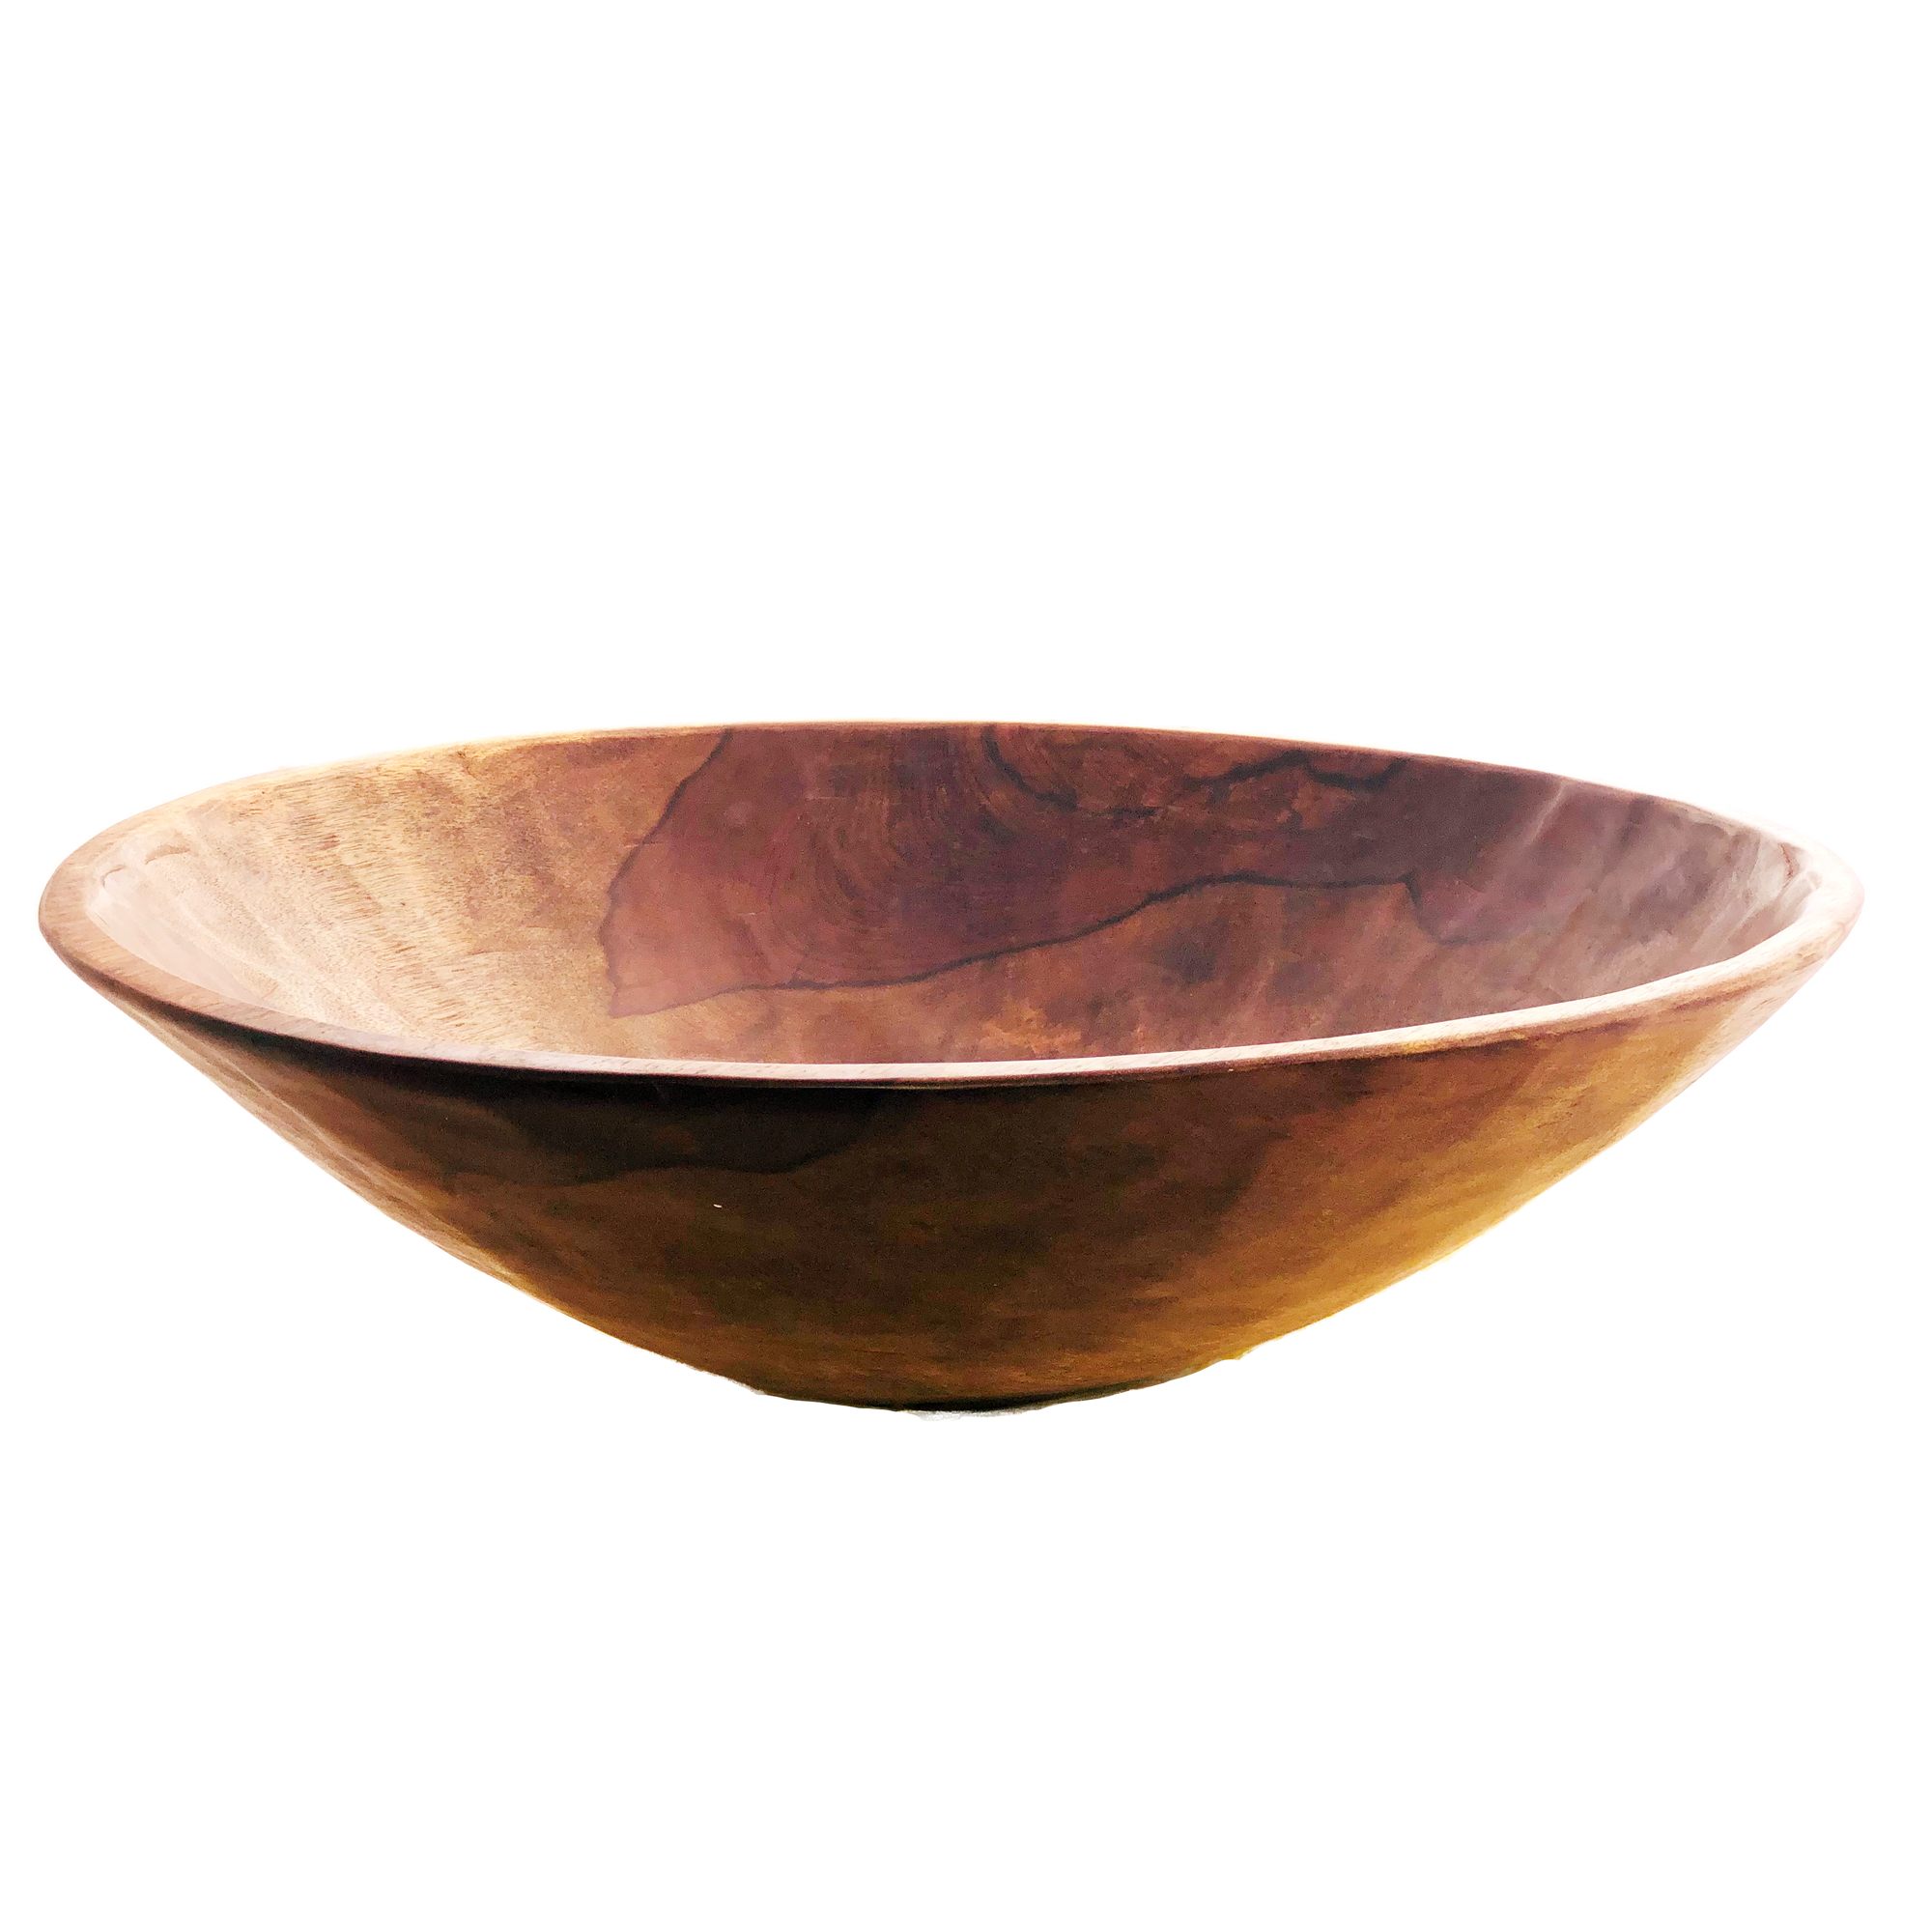 Hand Carved DEEP Wood Bowl 24 inch